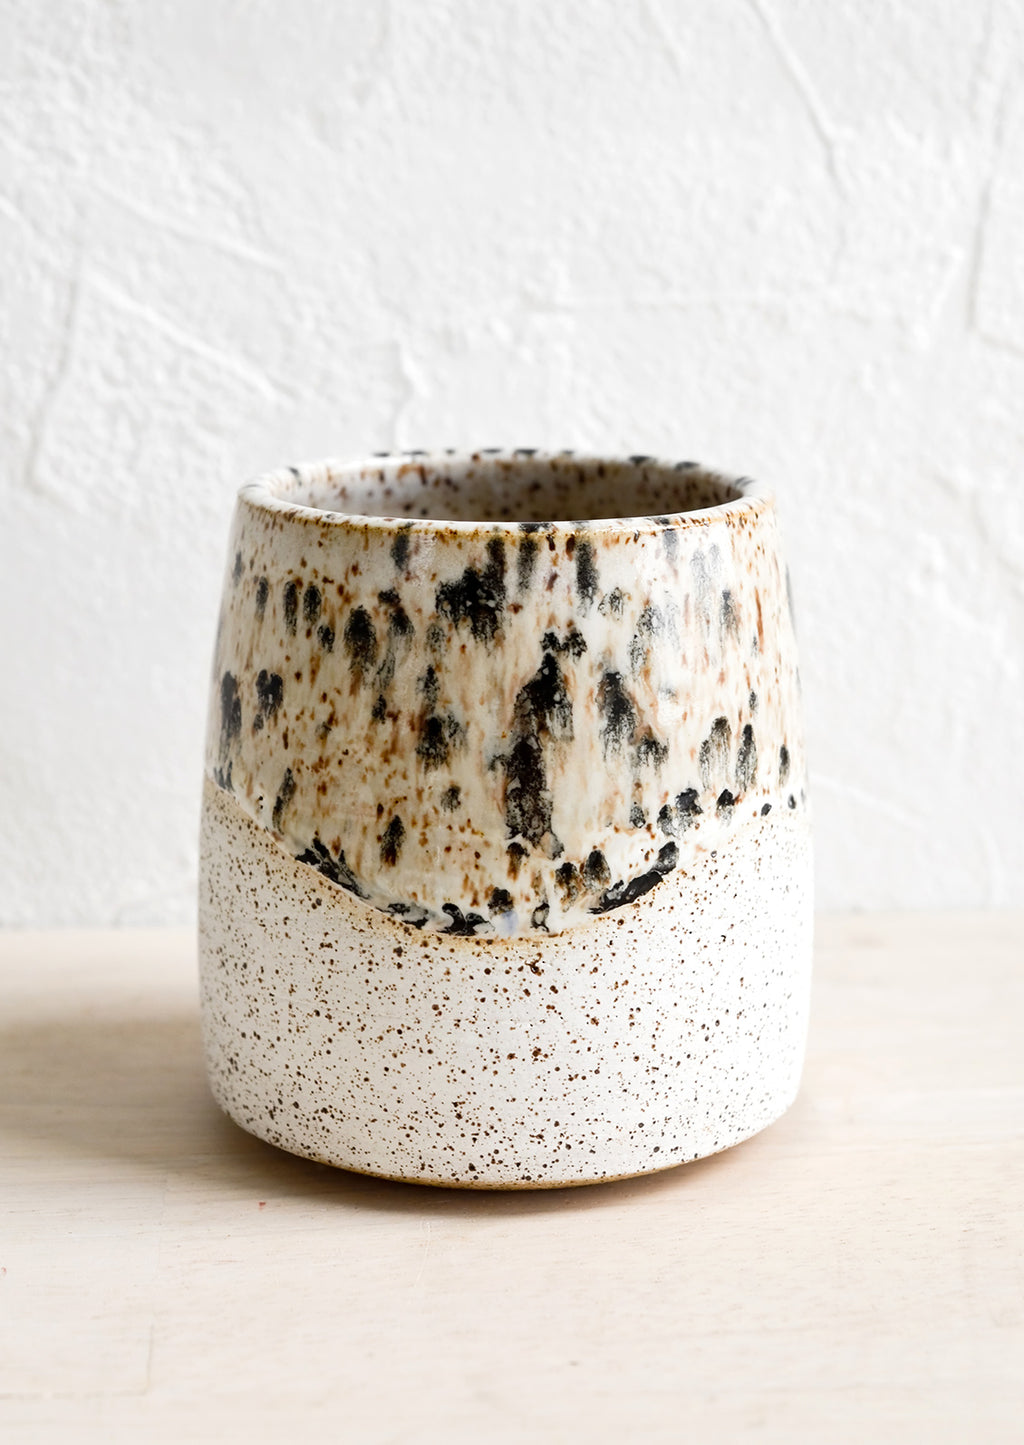 1: White speckled ceramic cup with mottled glaze detail.